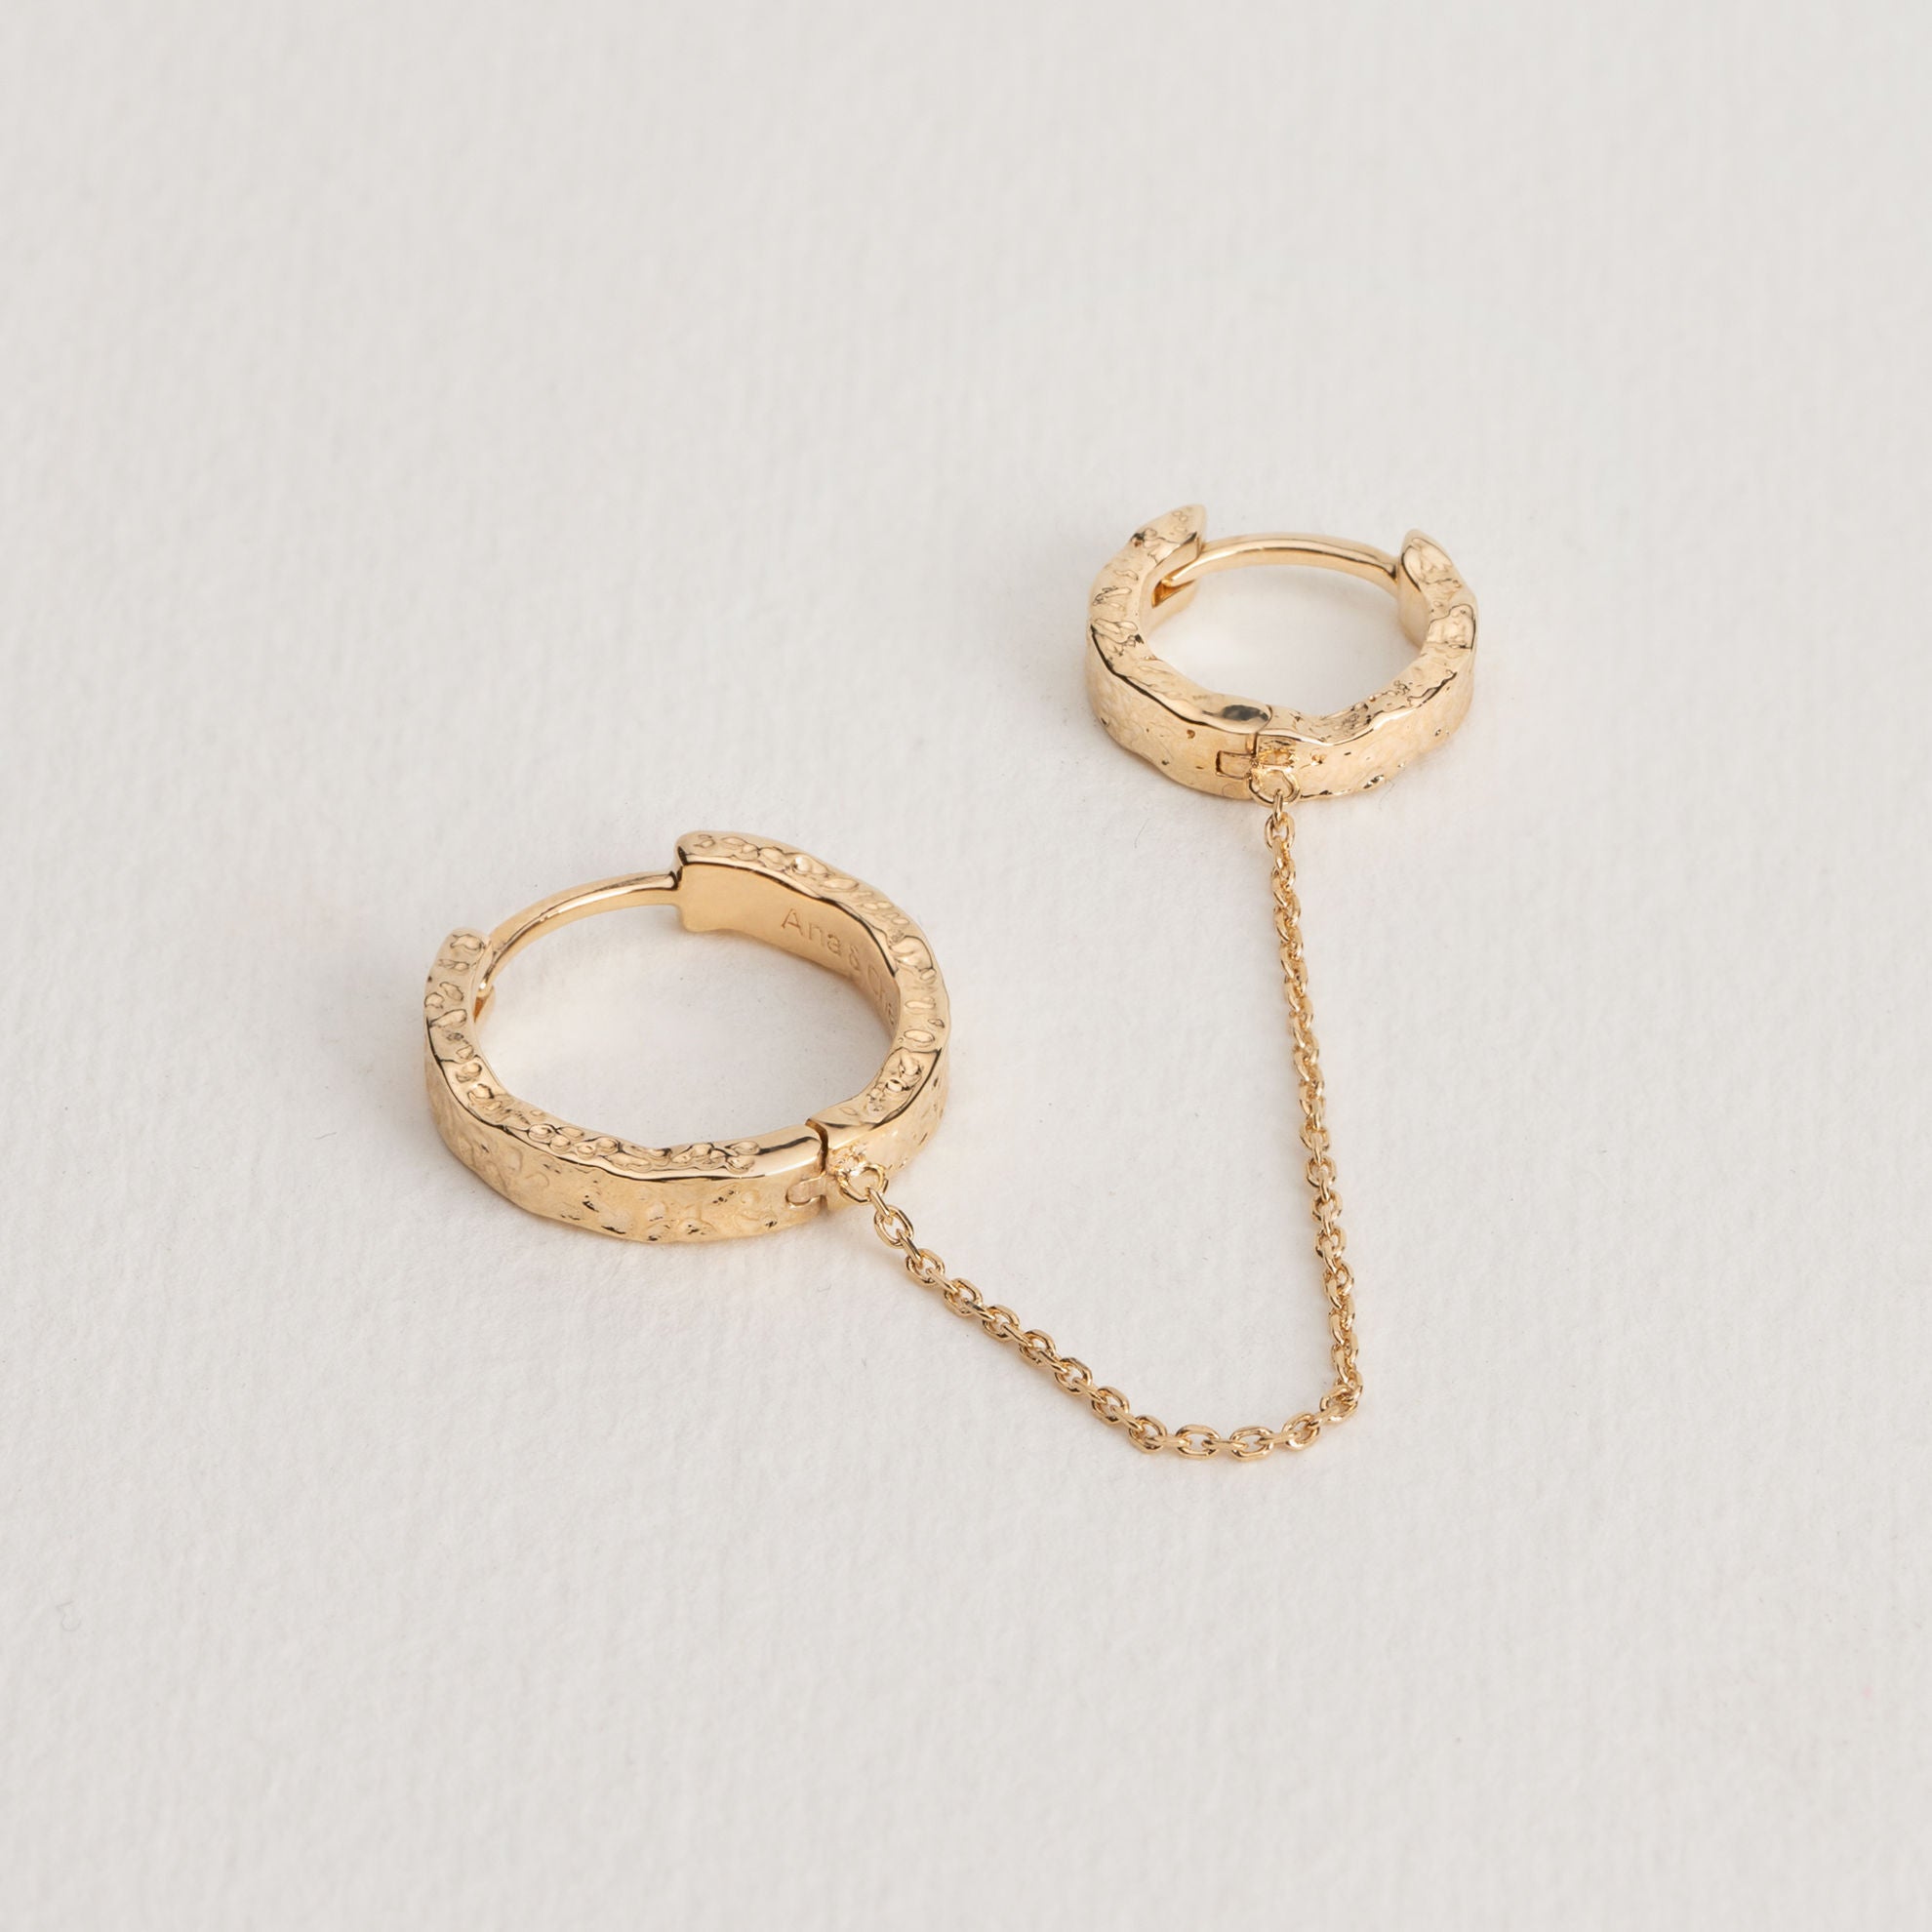 Noha - Gold Plated Ear Jewelry - Ana and Cha